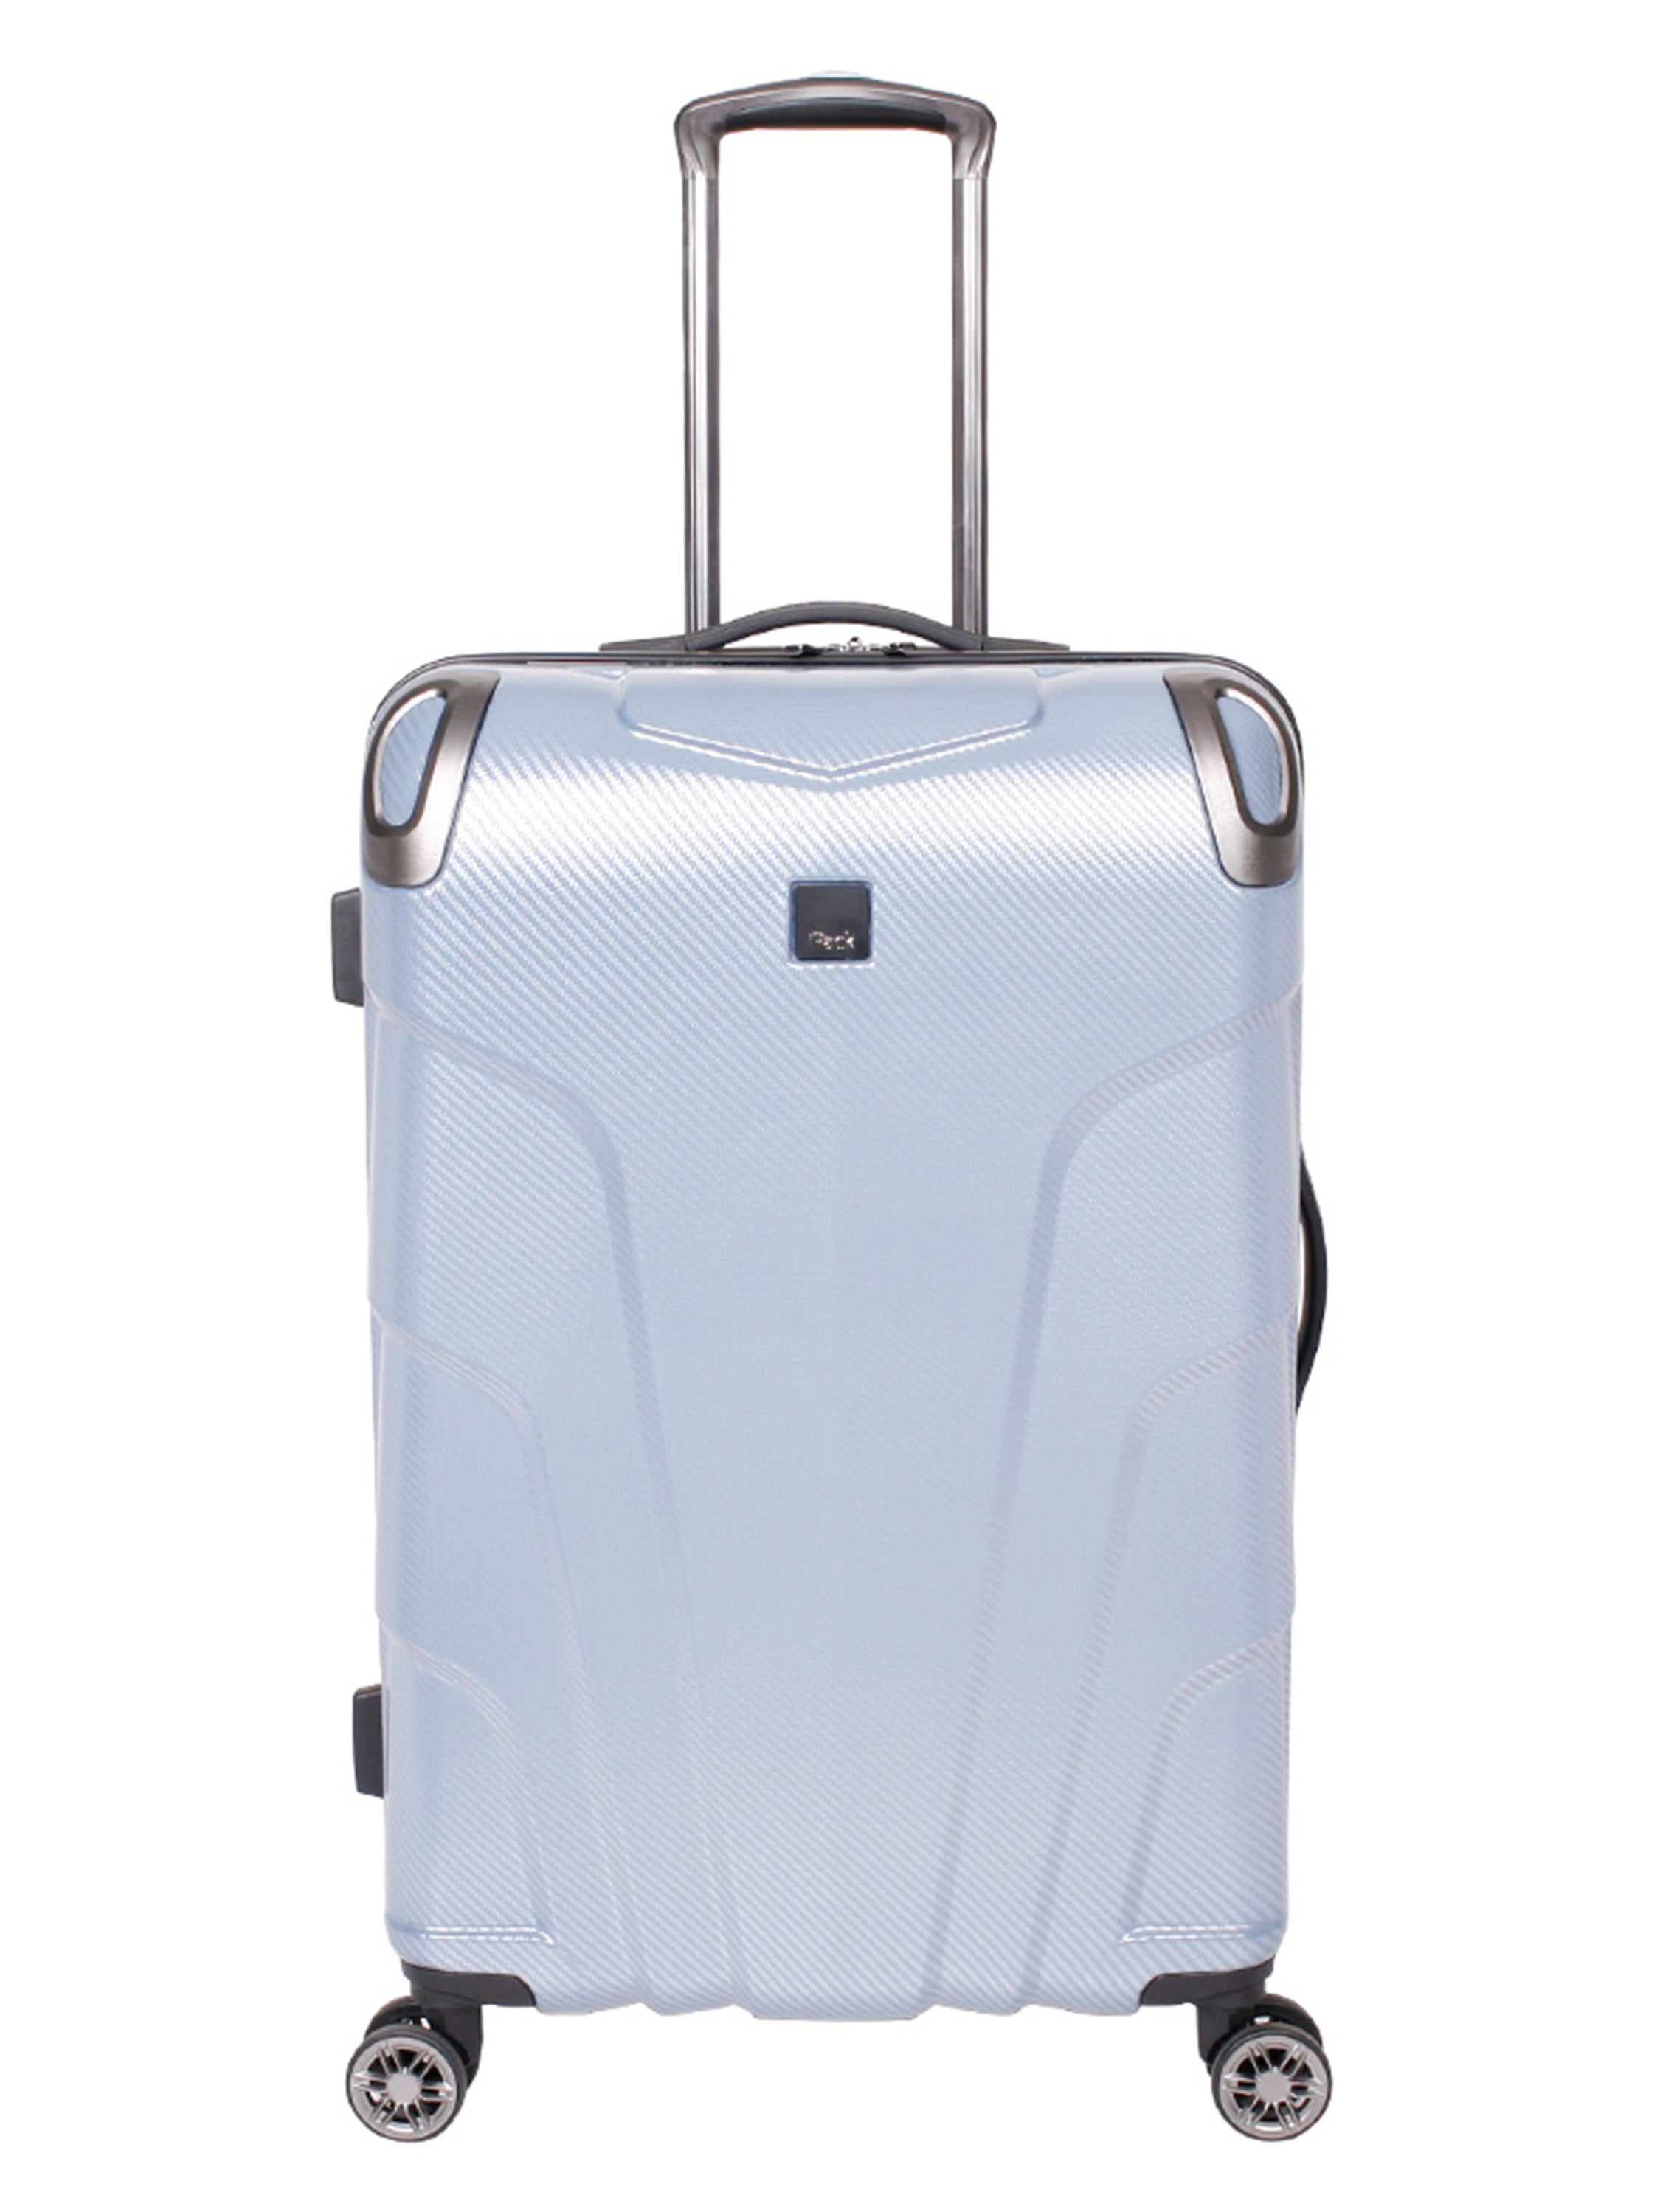 ipack launch luggage reviews